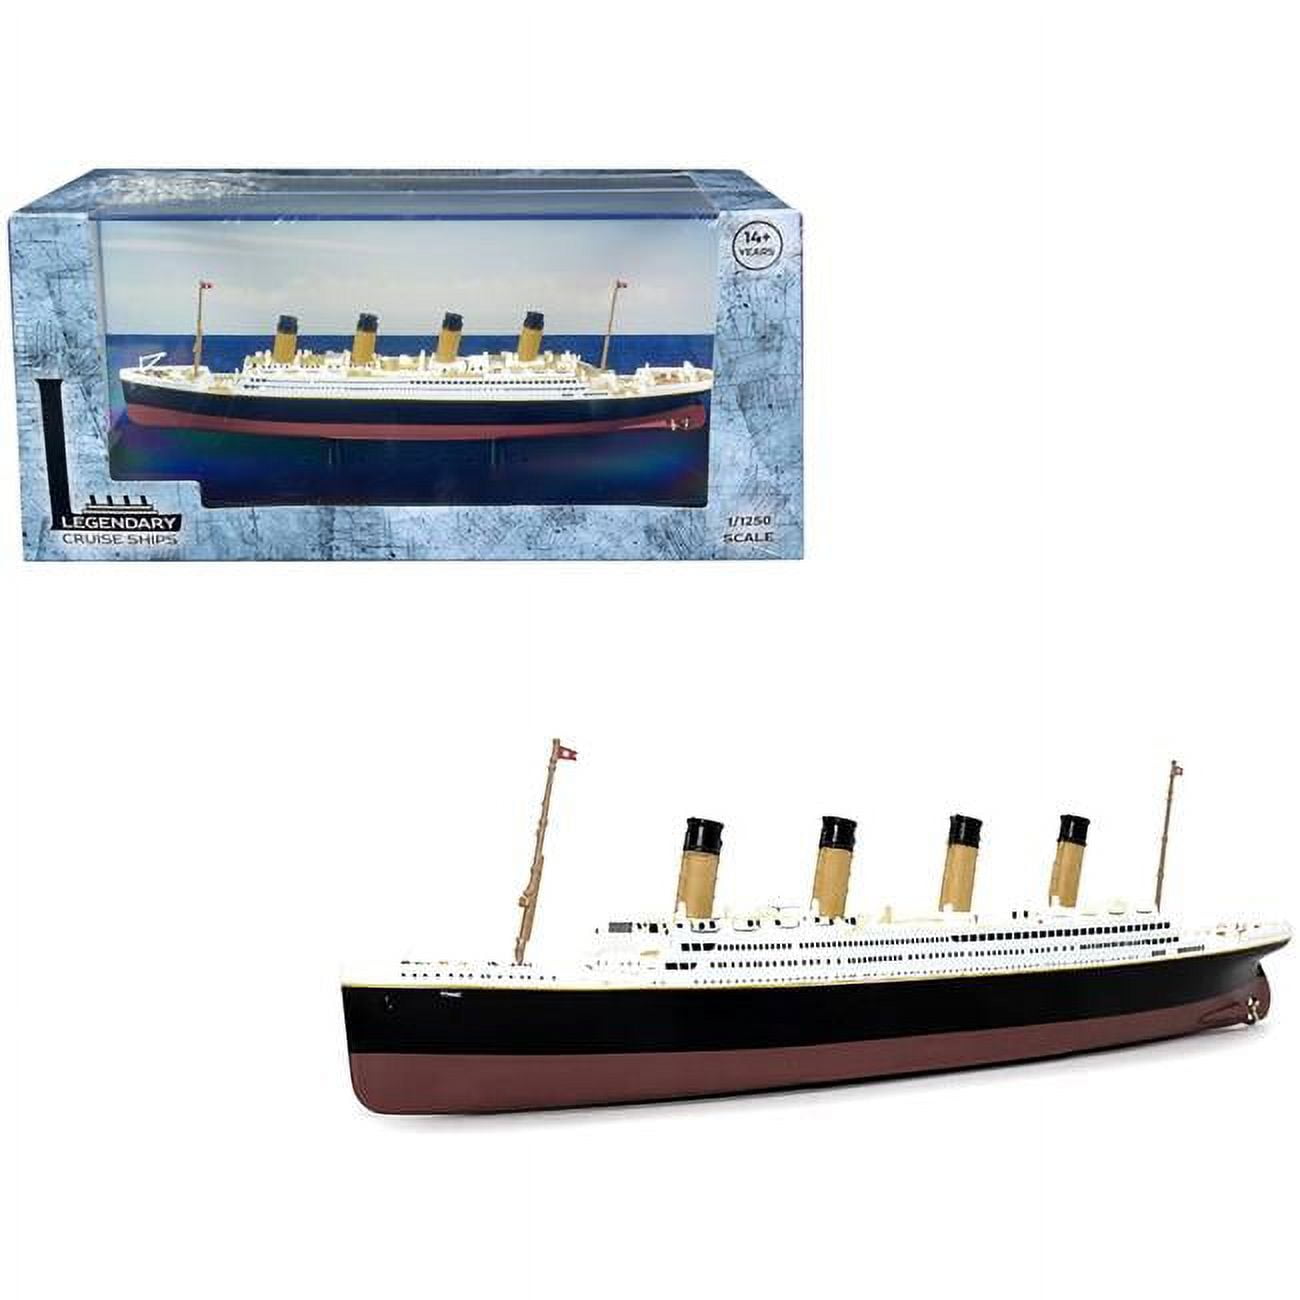 Picture of Legendary Cruise Ships 241945 1-1250 Scale RMS Titanic Passenger Ship Diecast Model